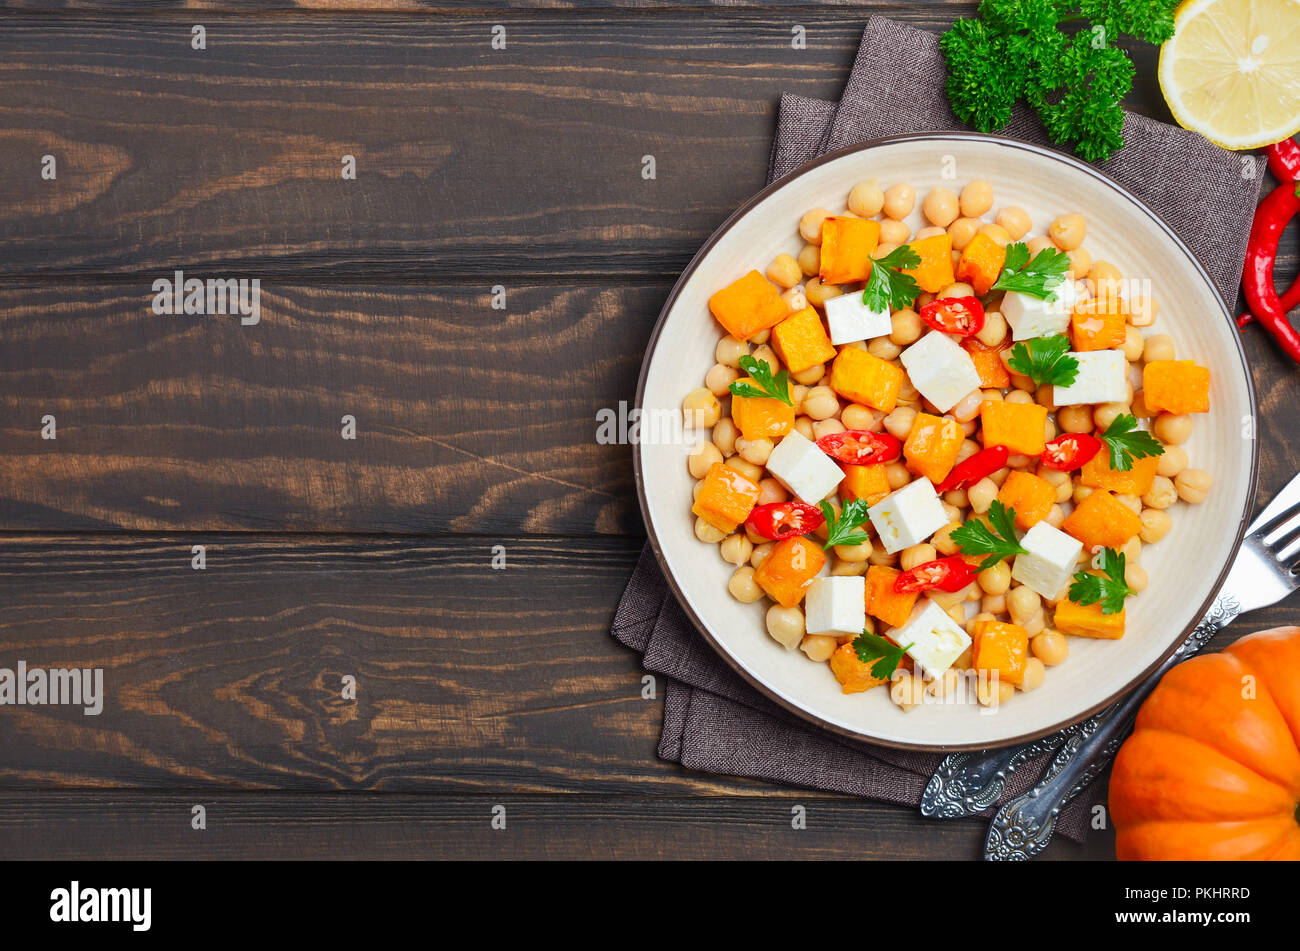 Autumnal Salad with Chickpea Pumpkin Feta Parsley and Chili Flat Lay Top View Flat Lay Stock Photo